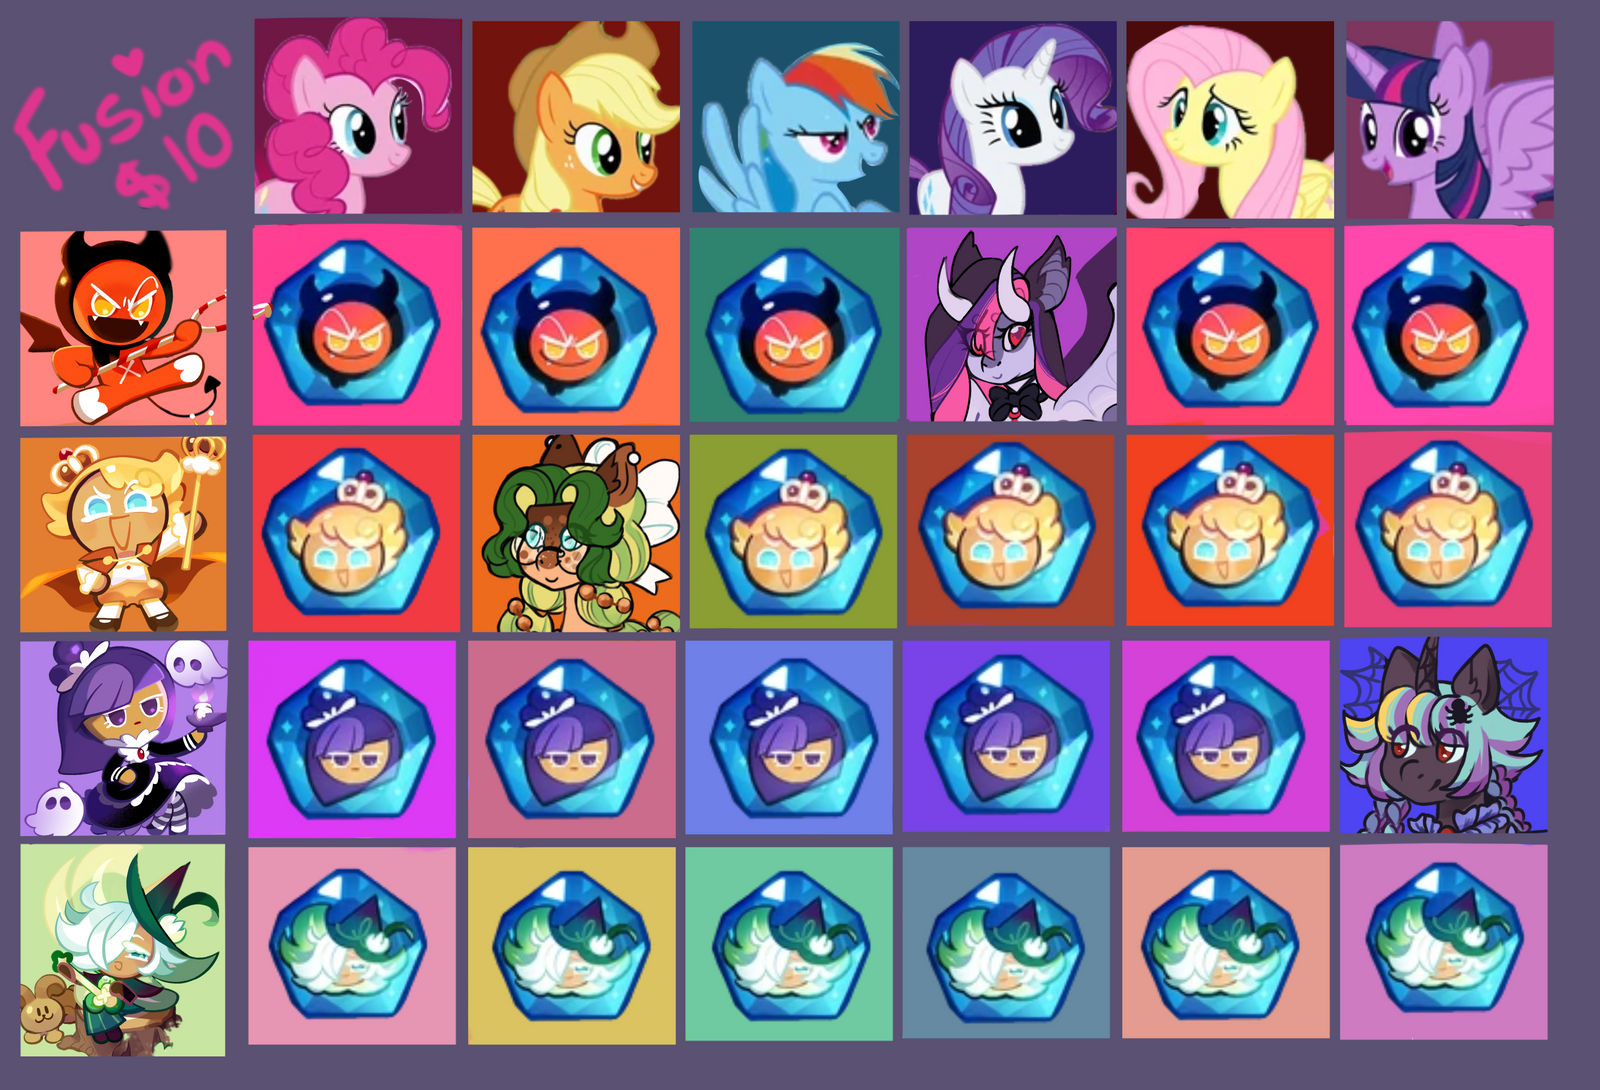 Mlp x cookie run fusion chart (open) by ghostunes on DeviantArt